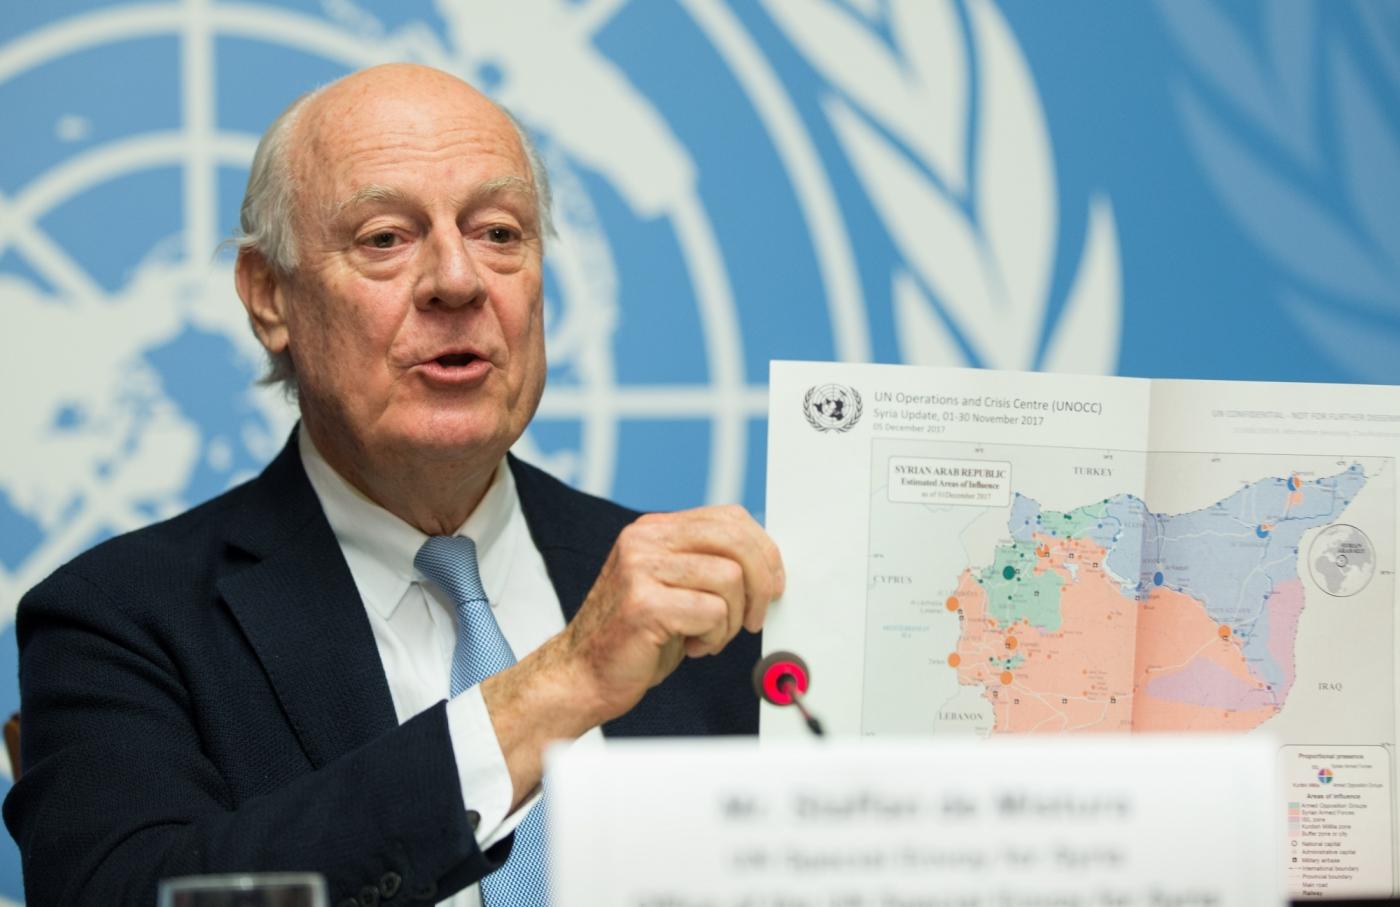 GENEVA, Dec. 14, 2017 (Xinhua) -- The UN Special Envoy for Syria Staffan de Mistura shows a map of Syria at a press conference in Geneva, Switzerland, on Dec. 14, 2017. Staffan de Mistura said that the way Intra-Syrian peace talks proceed will come after he speaks to the Security Council in New York as the eighth round ended Thursday without "real negotiations." (Xinhua/Xu Jinquan/IANS) by .